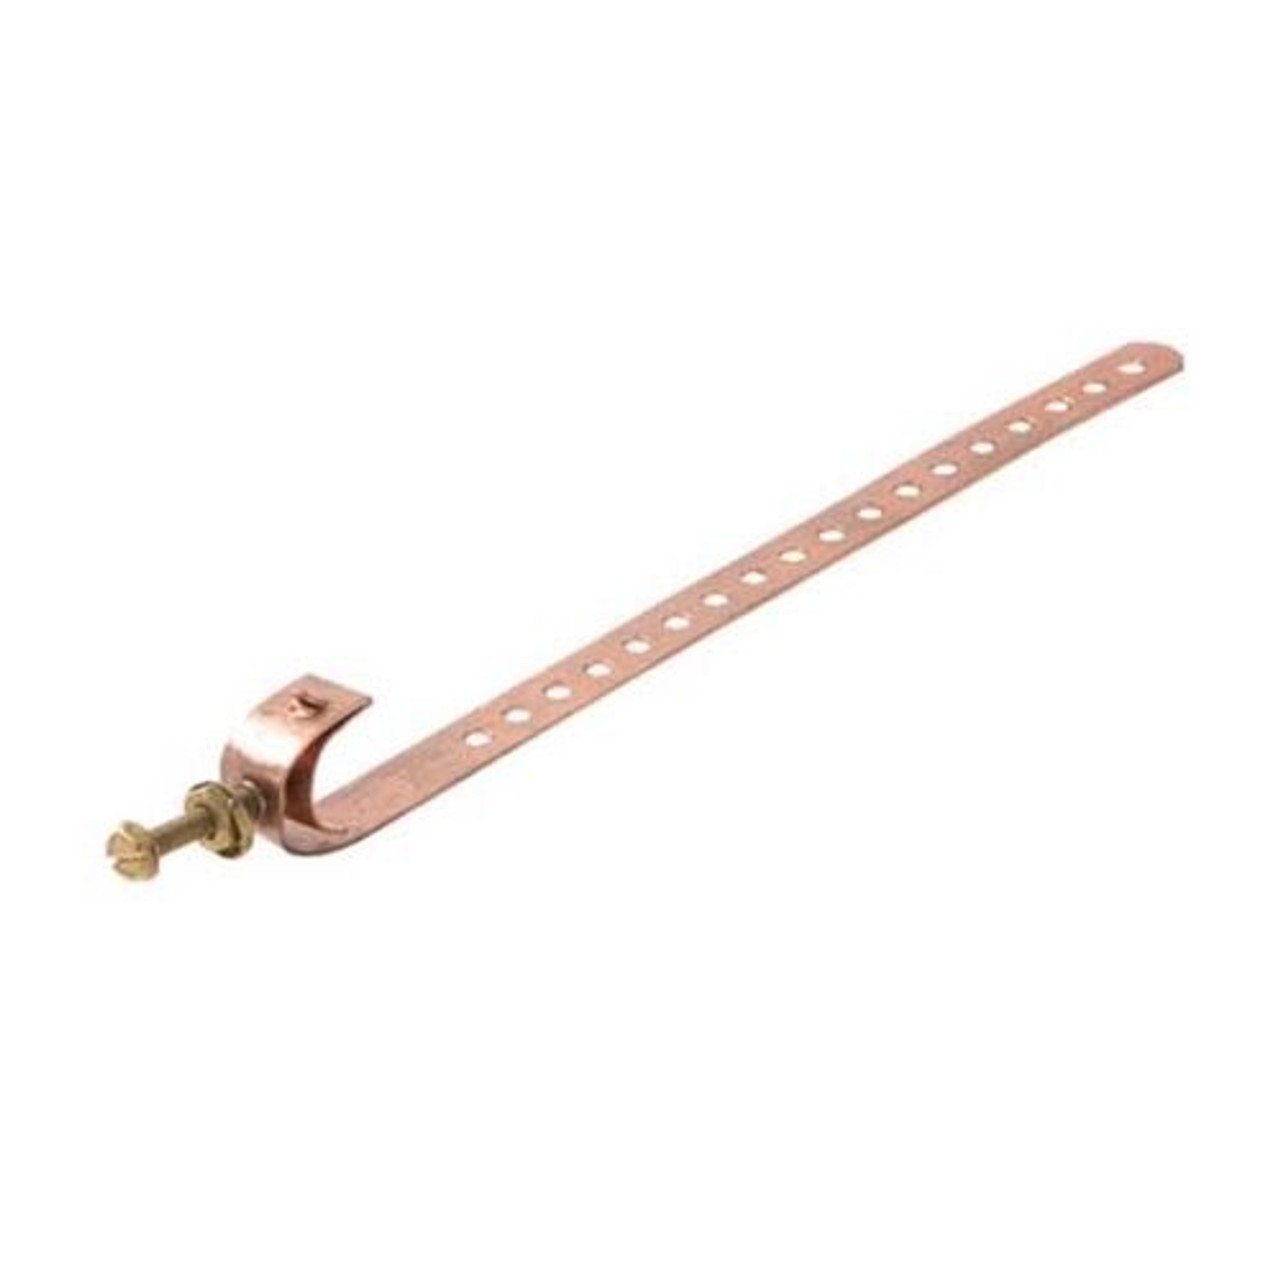 Eagle 6" Inch Copper Grounding Strap DIRECTV Approved UL Listed Antenna Bonding Ground Satellite Dish Adjustable Electrical Lighting Power Surge Suppression, Flexible Wrap-On A-24-10, Sold as Singles